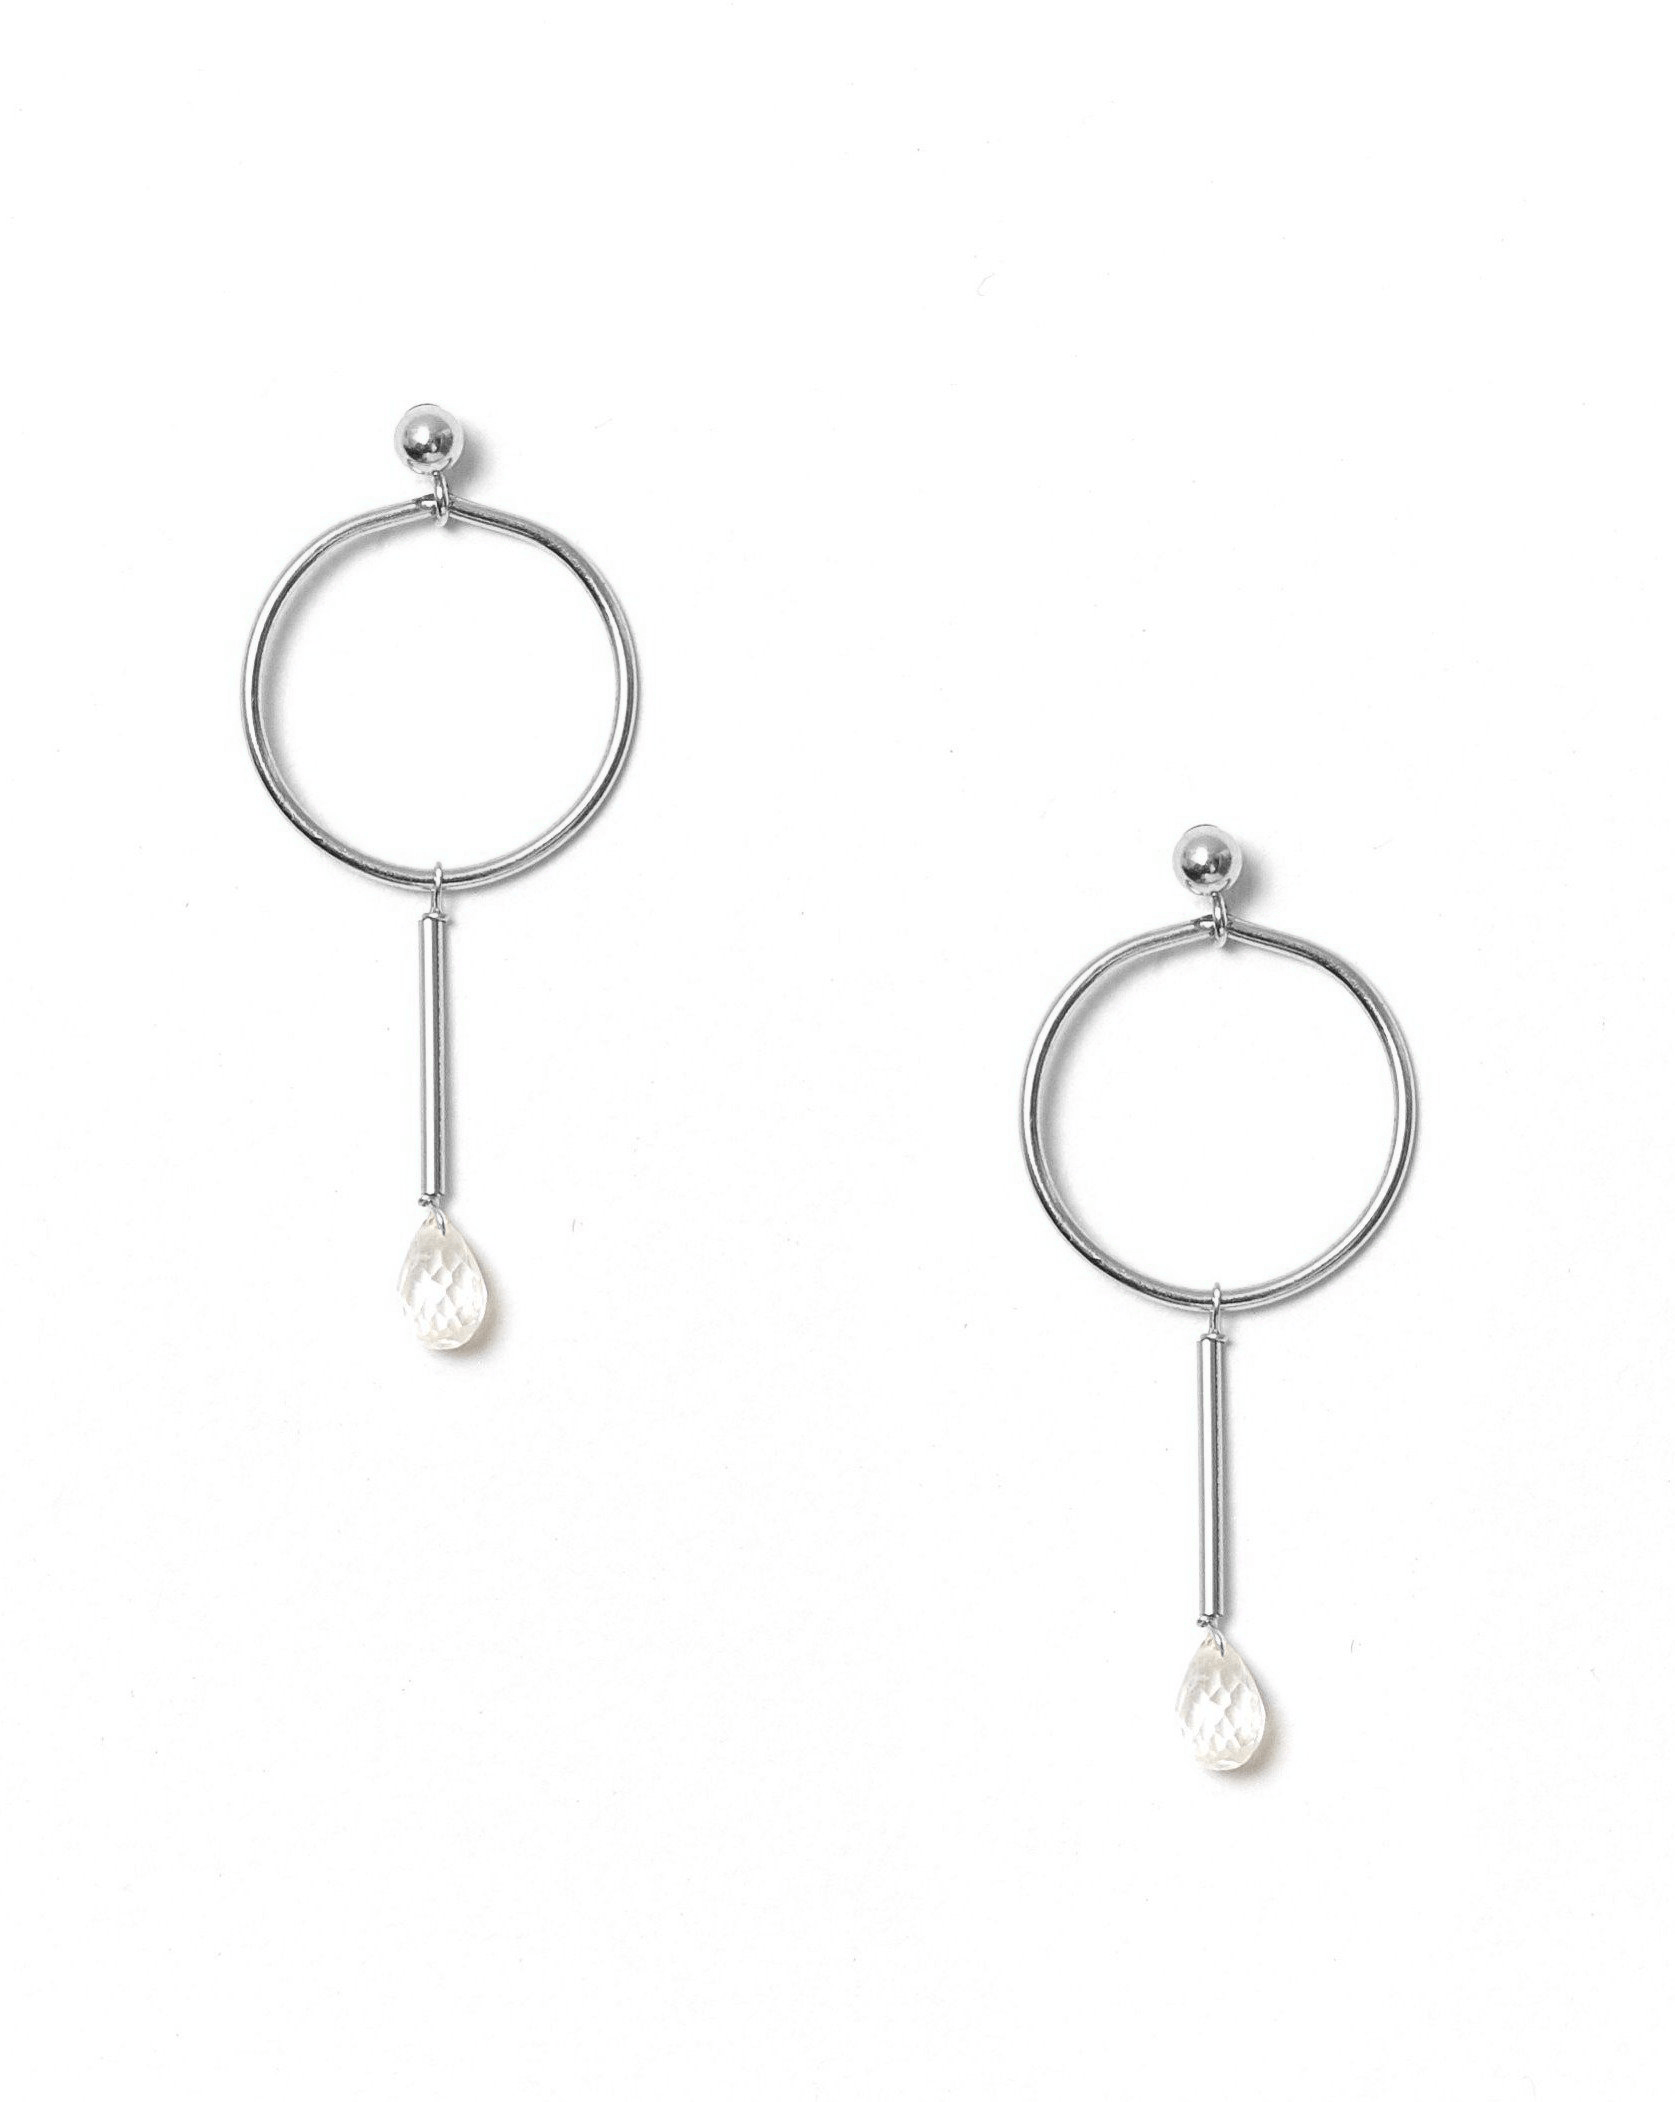 Osea Earrings by KOZAKH. Ball stud drop earrings in Sterling Silver, featuring a faceted Moonstone droplet.